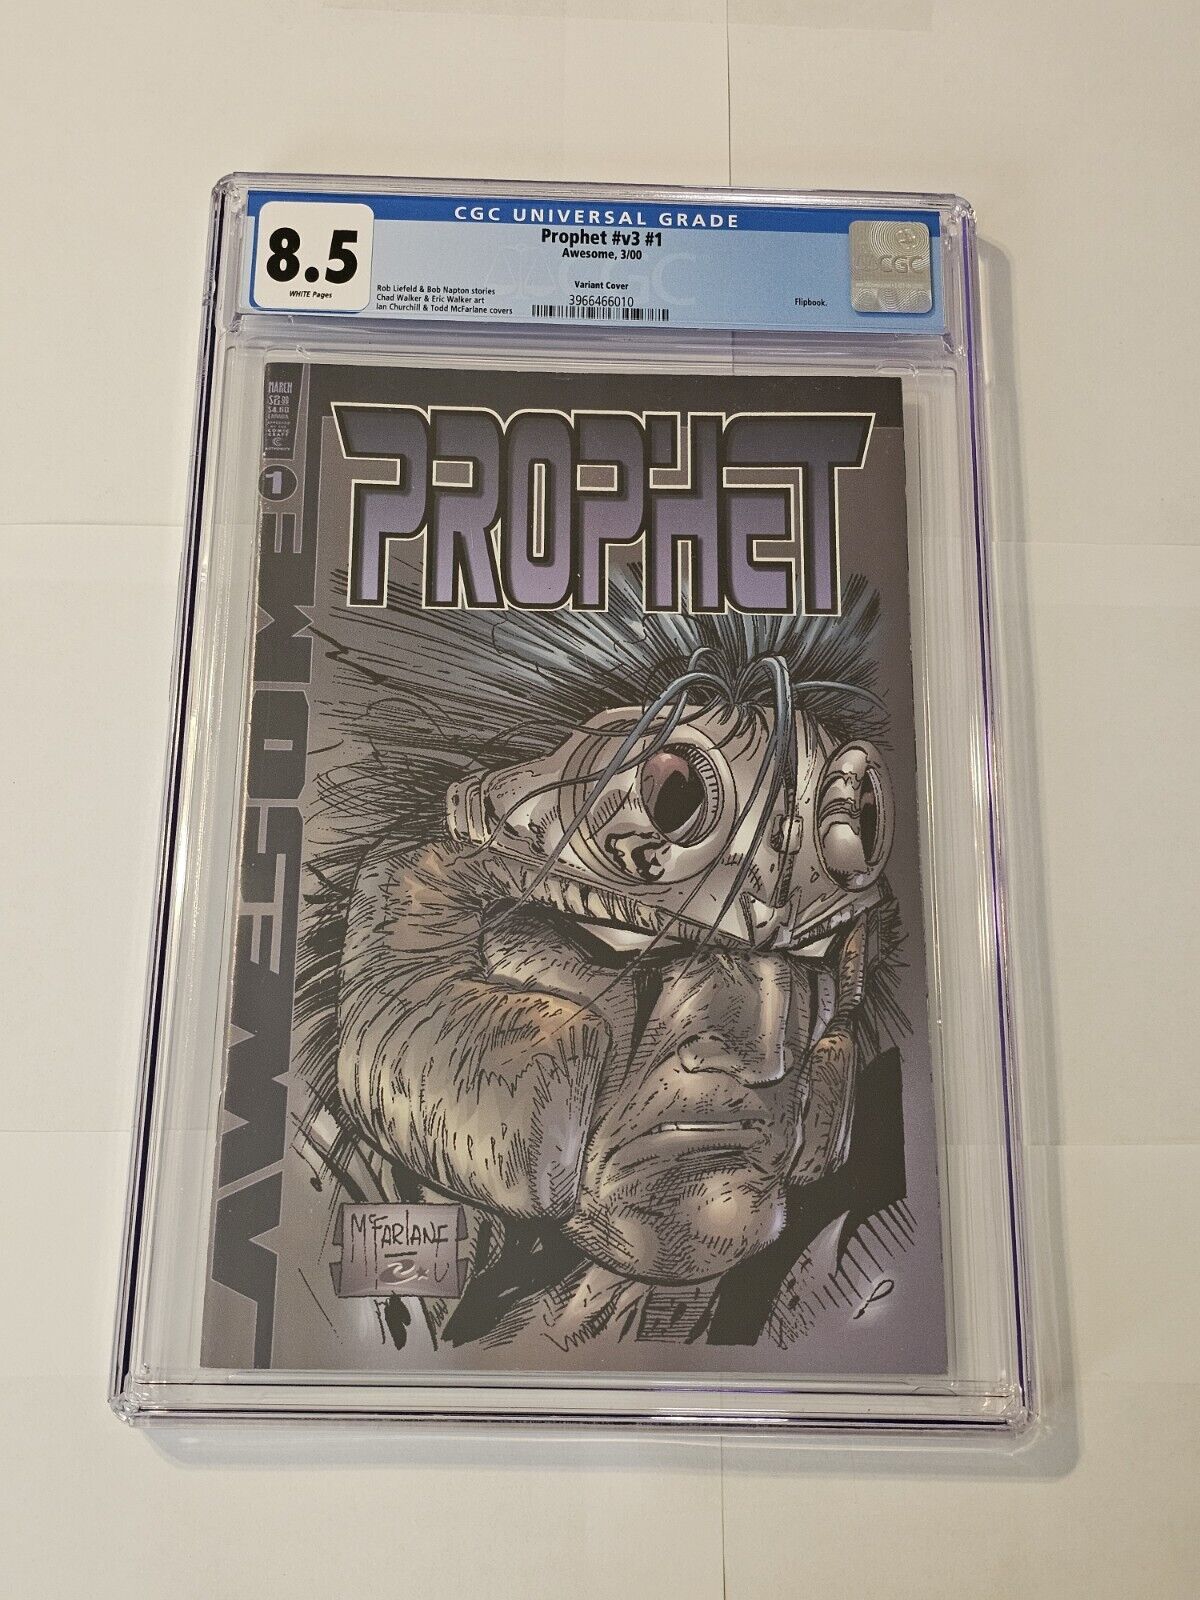 Prophet #v3 #1 Todd McFarlane Variant Cover Awesome Comics CGC 8.5 GRADED